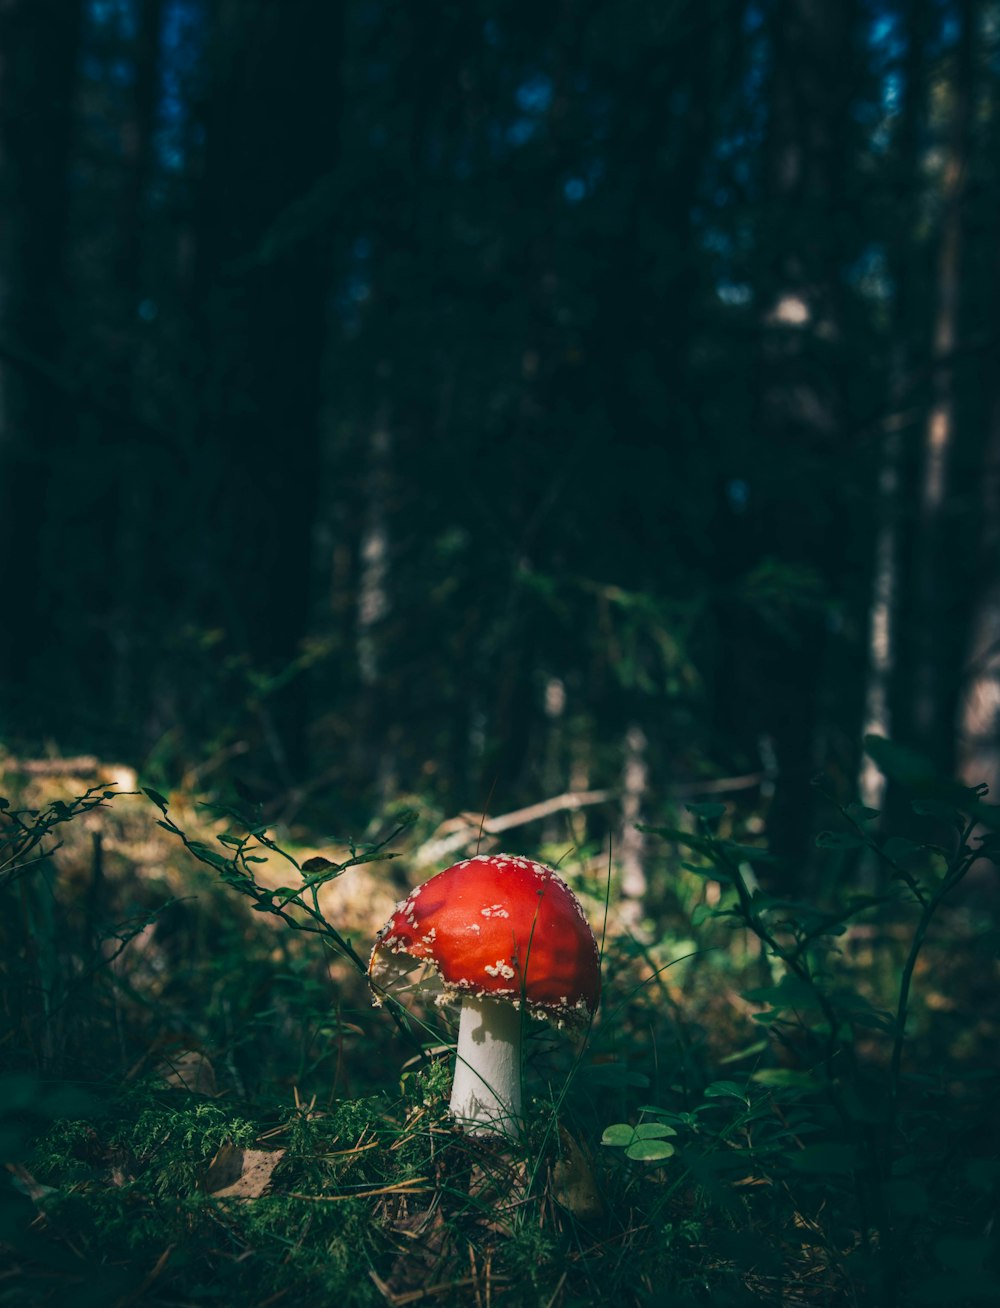 red cap mushroom surrounded by grass in forest